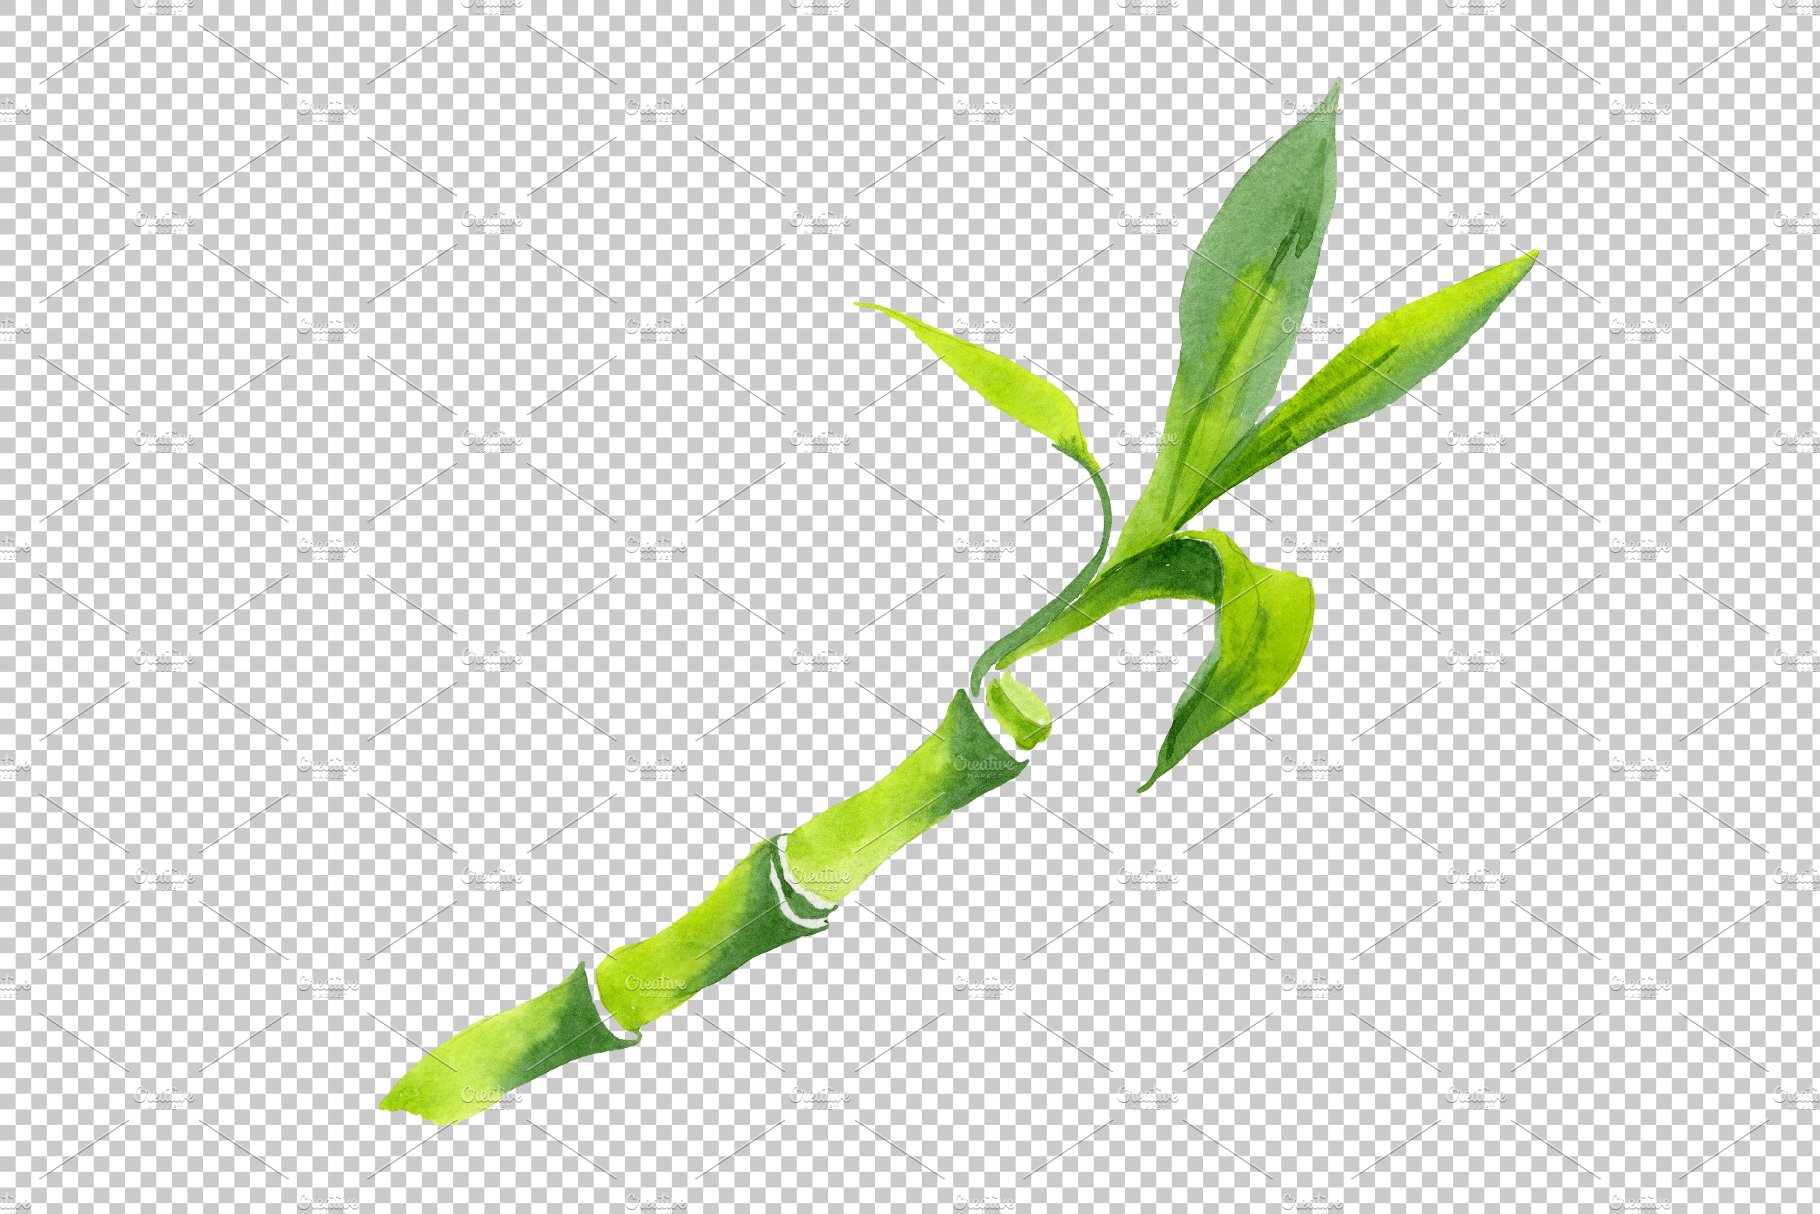 Bamboo plant with green leaves on a white background.